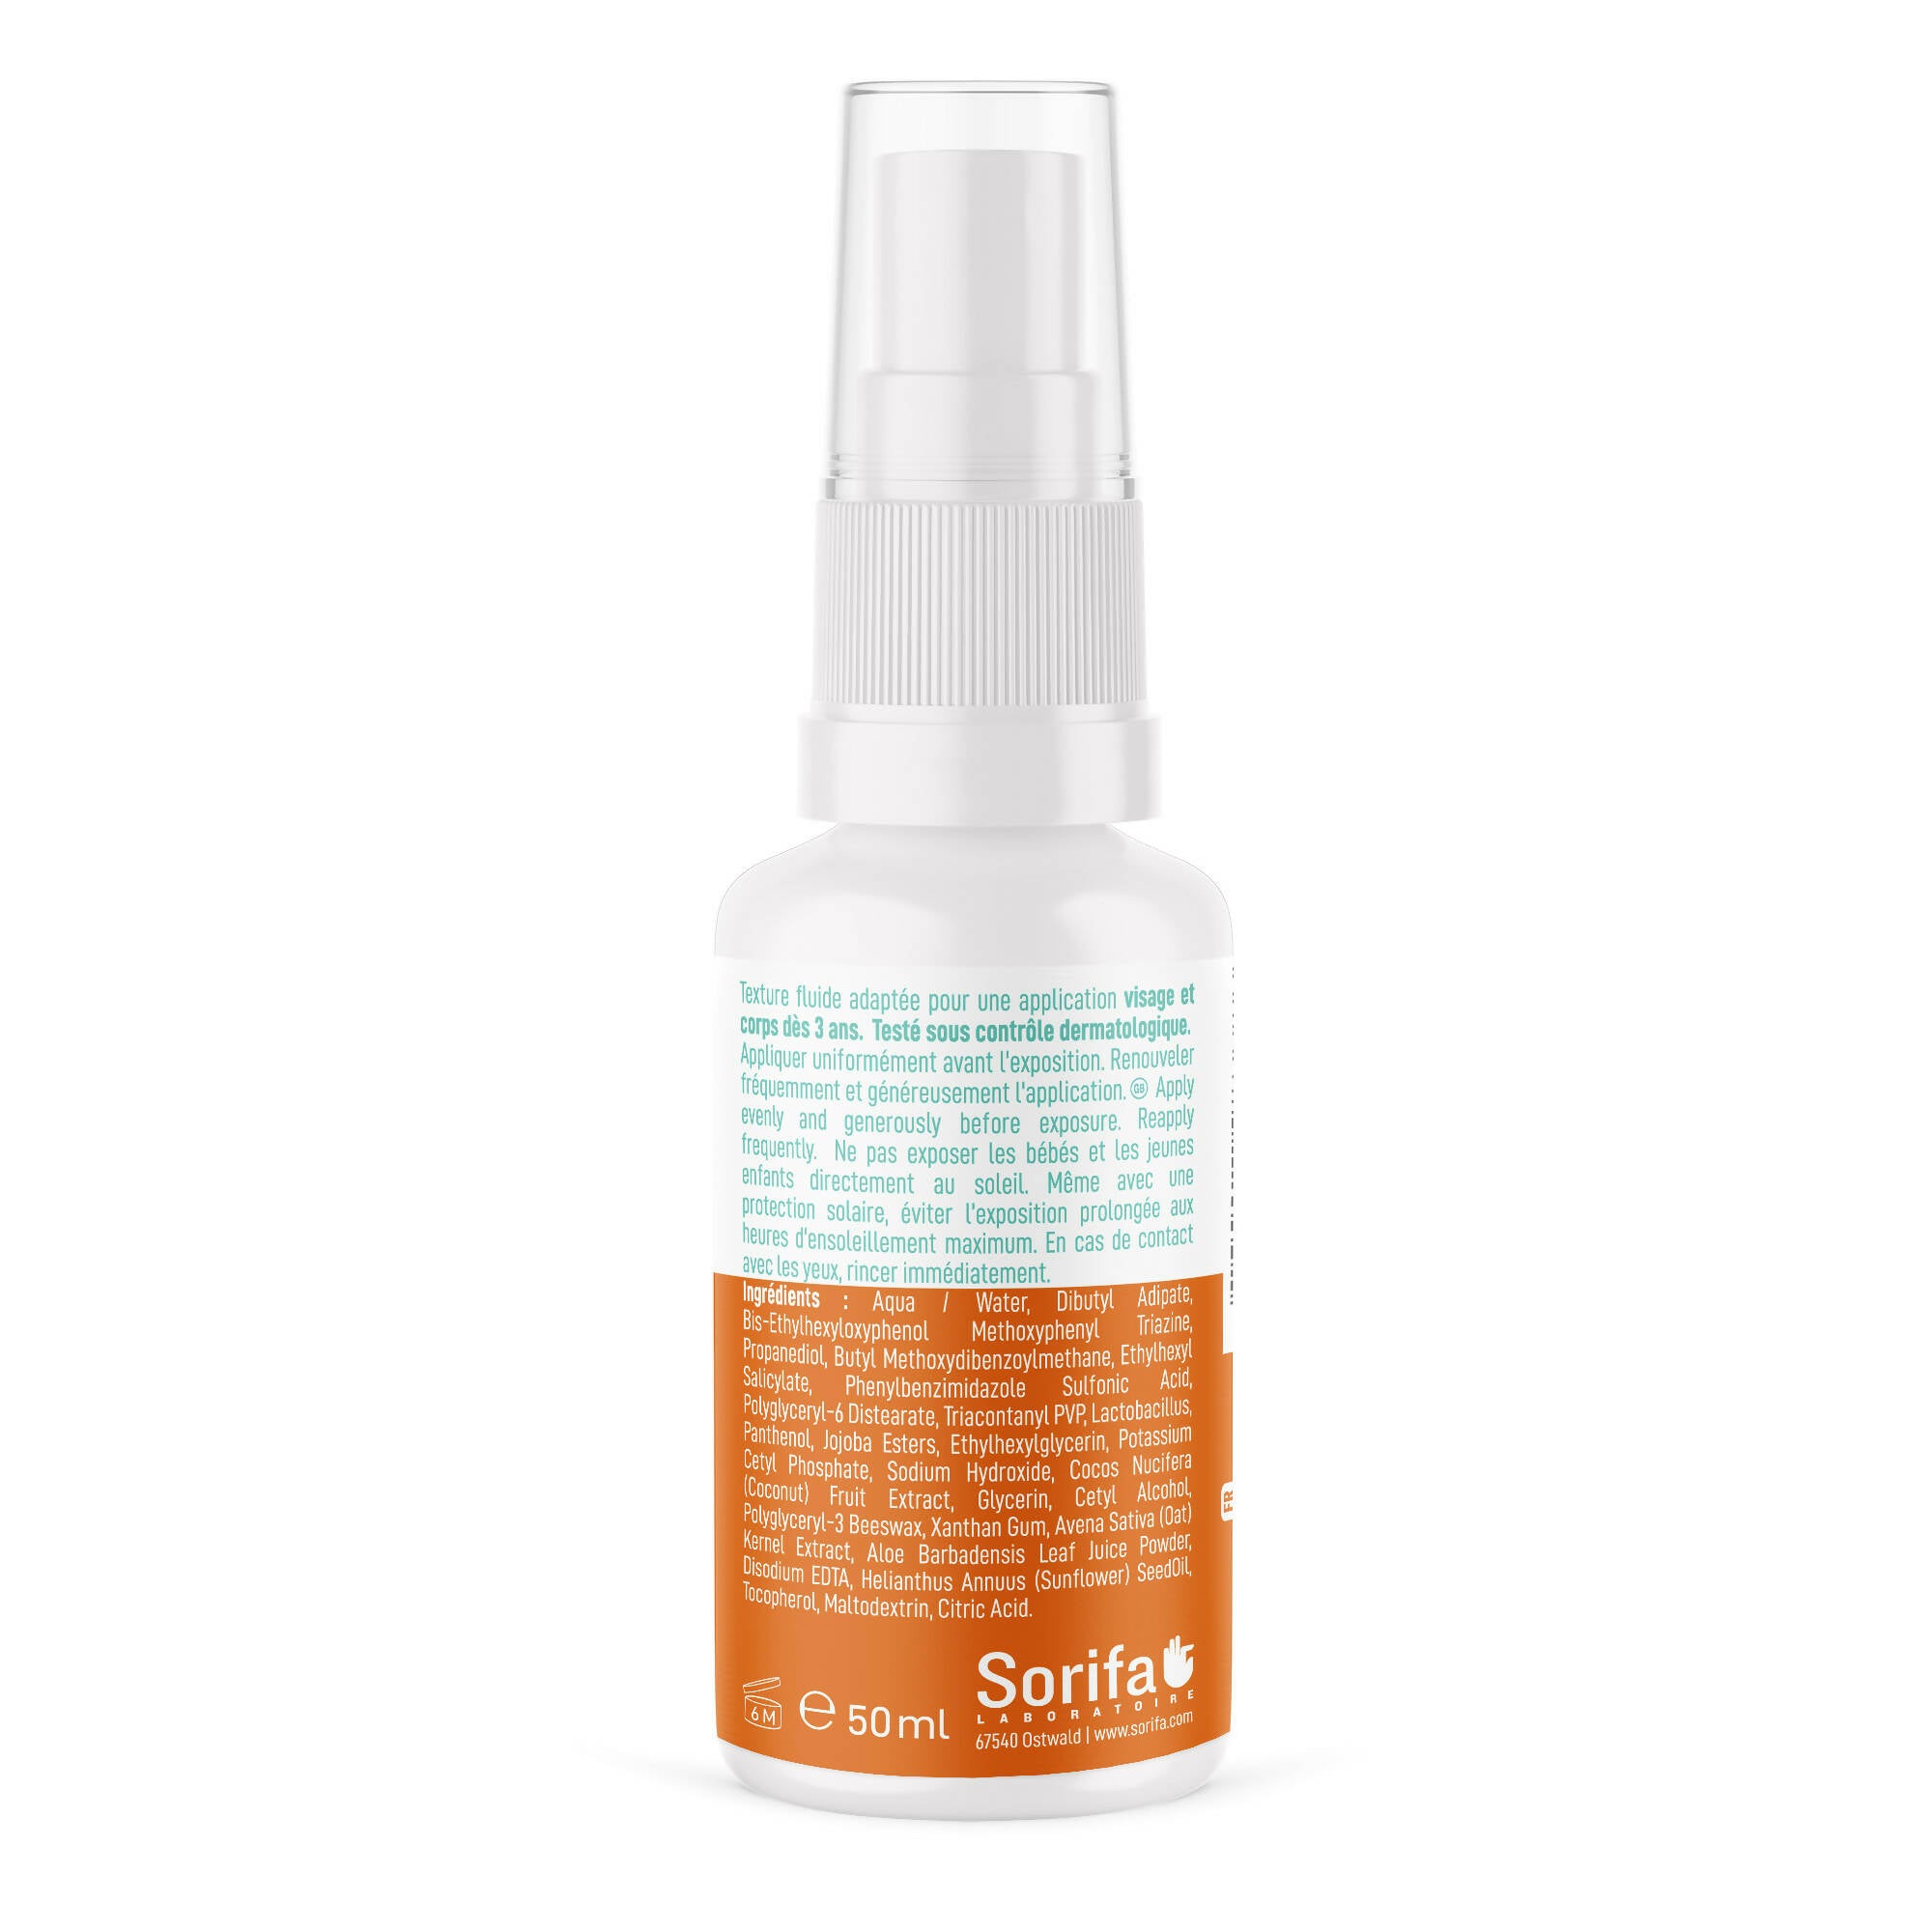 SORIFA - Complete box of 15 - Dermscreen - SPF50+ sun spray - Face and body - Ocean Friendly formula - Water resistant - For the whole family from 3 years old - Made in France - 50 ml spray